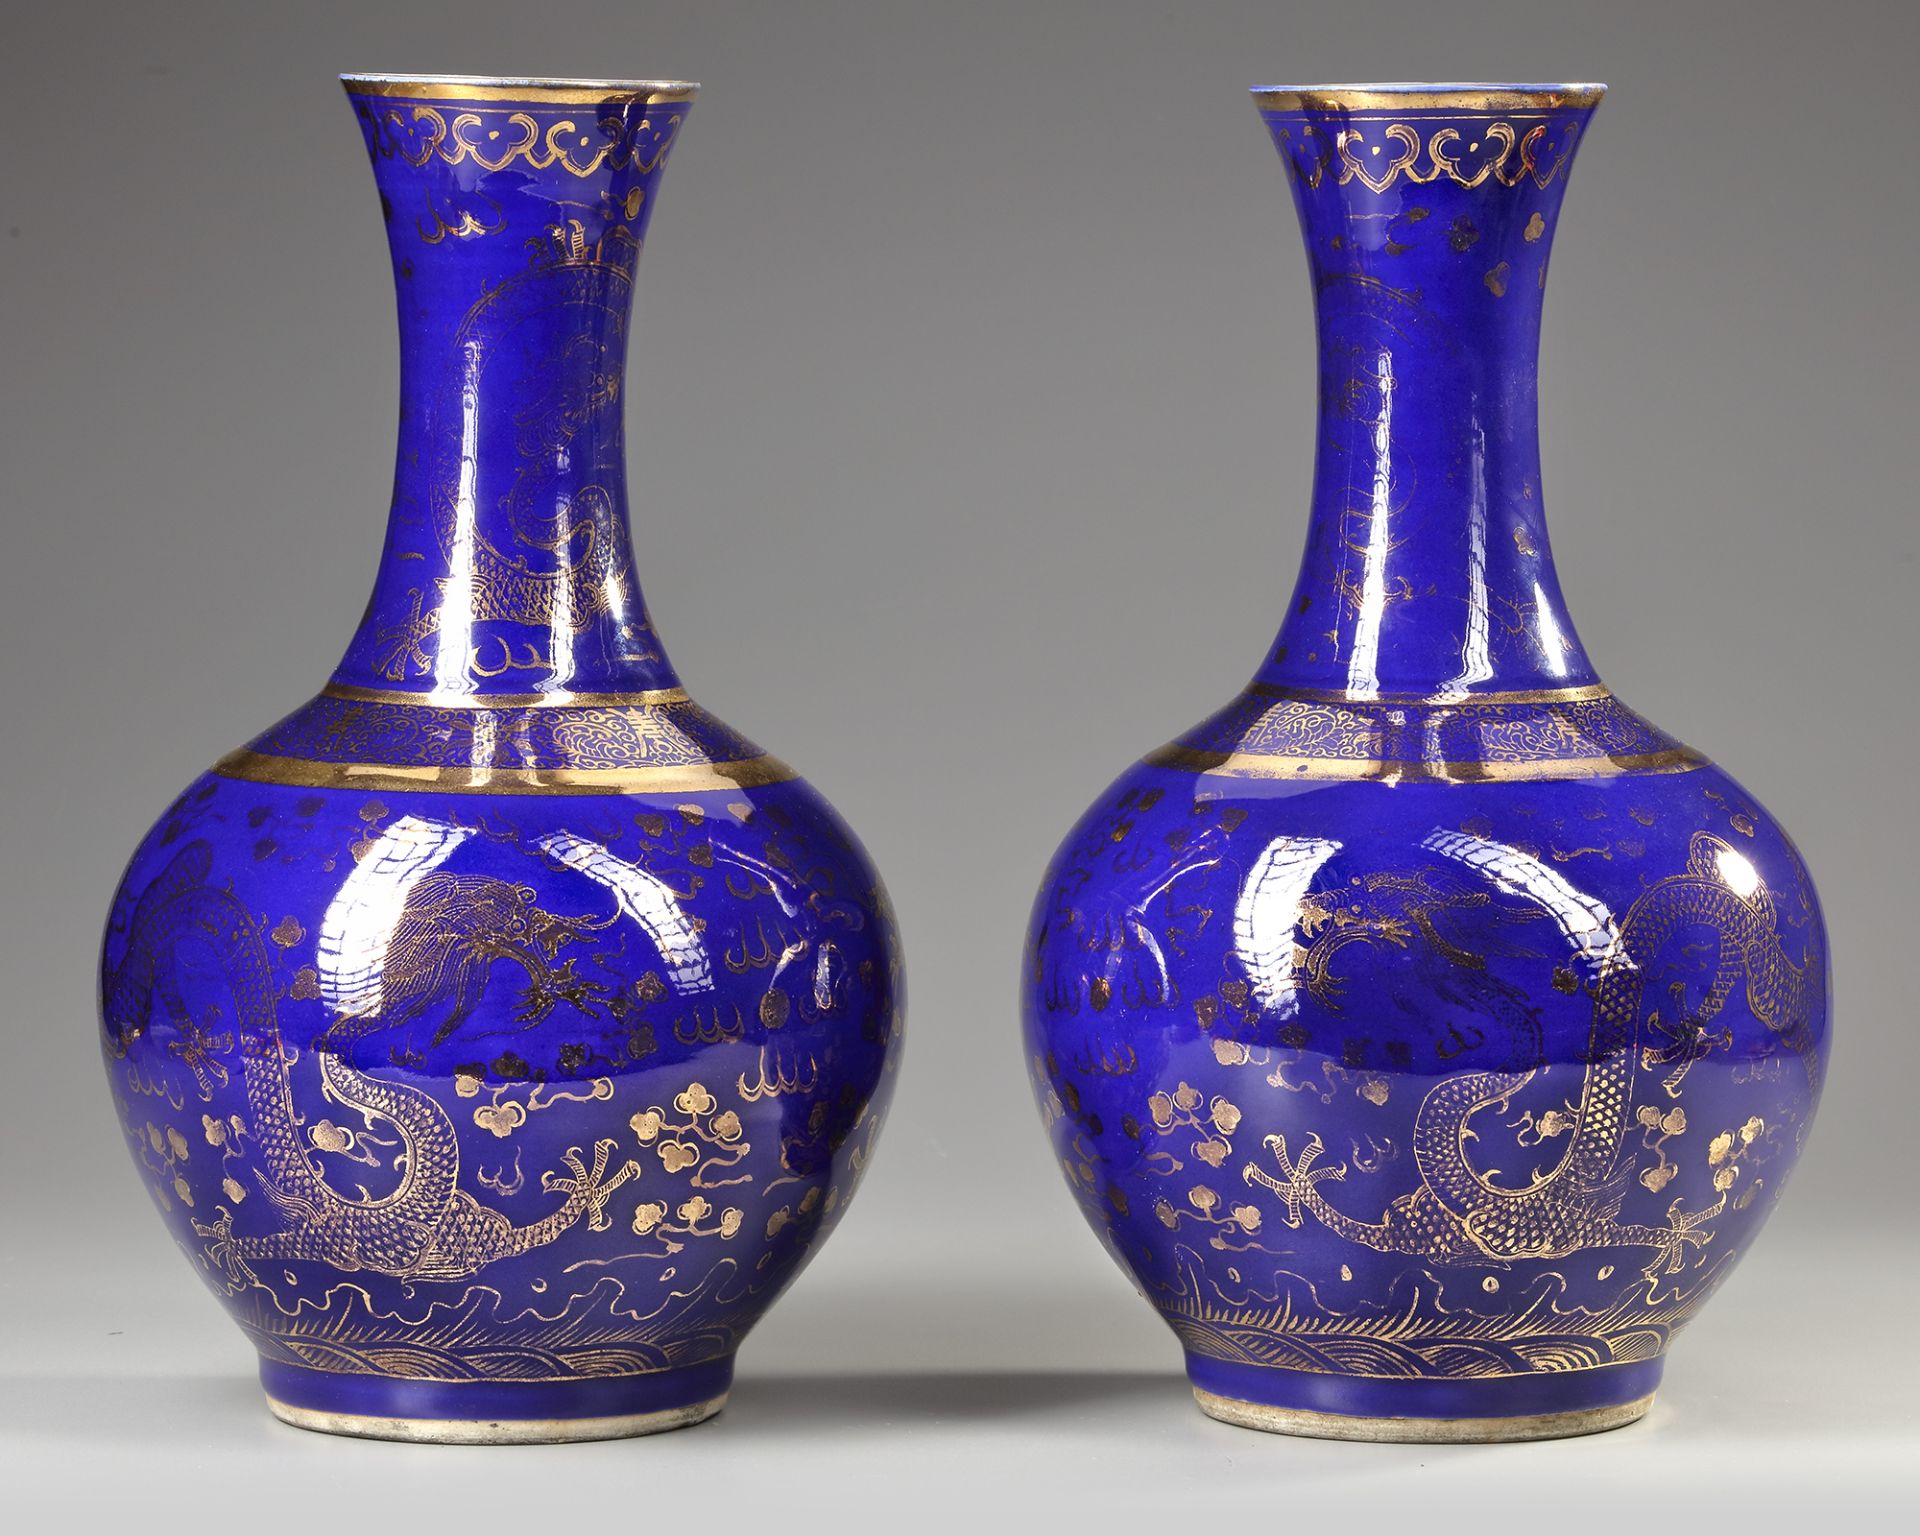 A PAIR OF CHINESE GILT POWDER-BLUE BOTTLE VASES, LATE 19TH-EARLY 20TH CENTURY